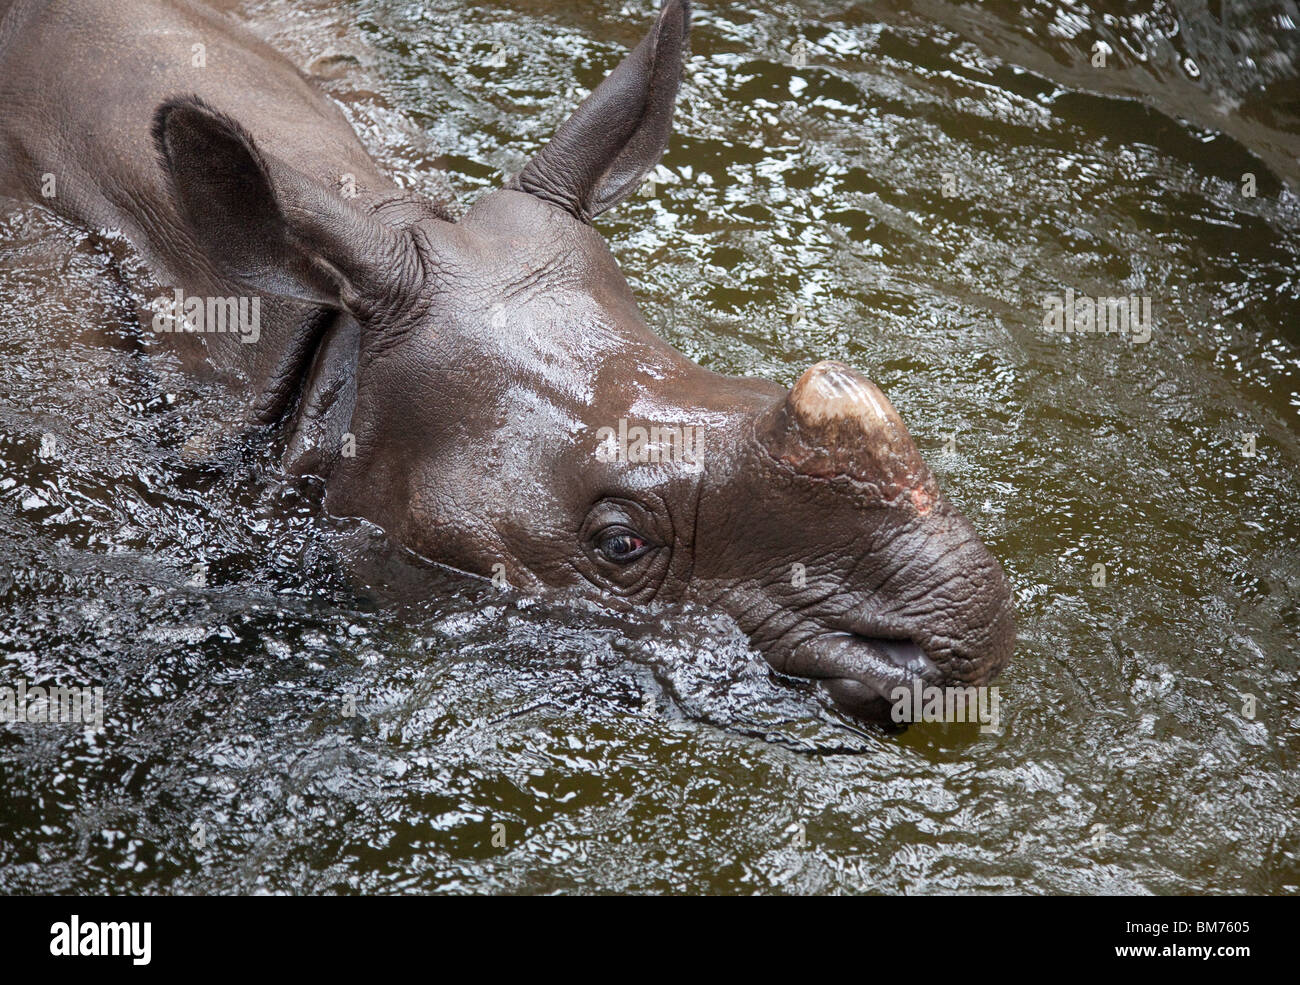 A female Indian Rhinocerous in water at the West Midland Safari PArk, Bewdley, Worcestershire, England, UK. Stock Photo